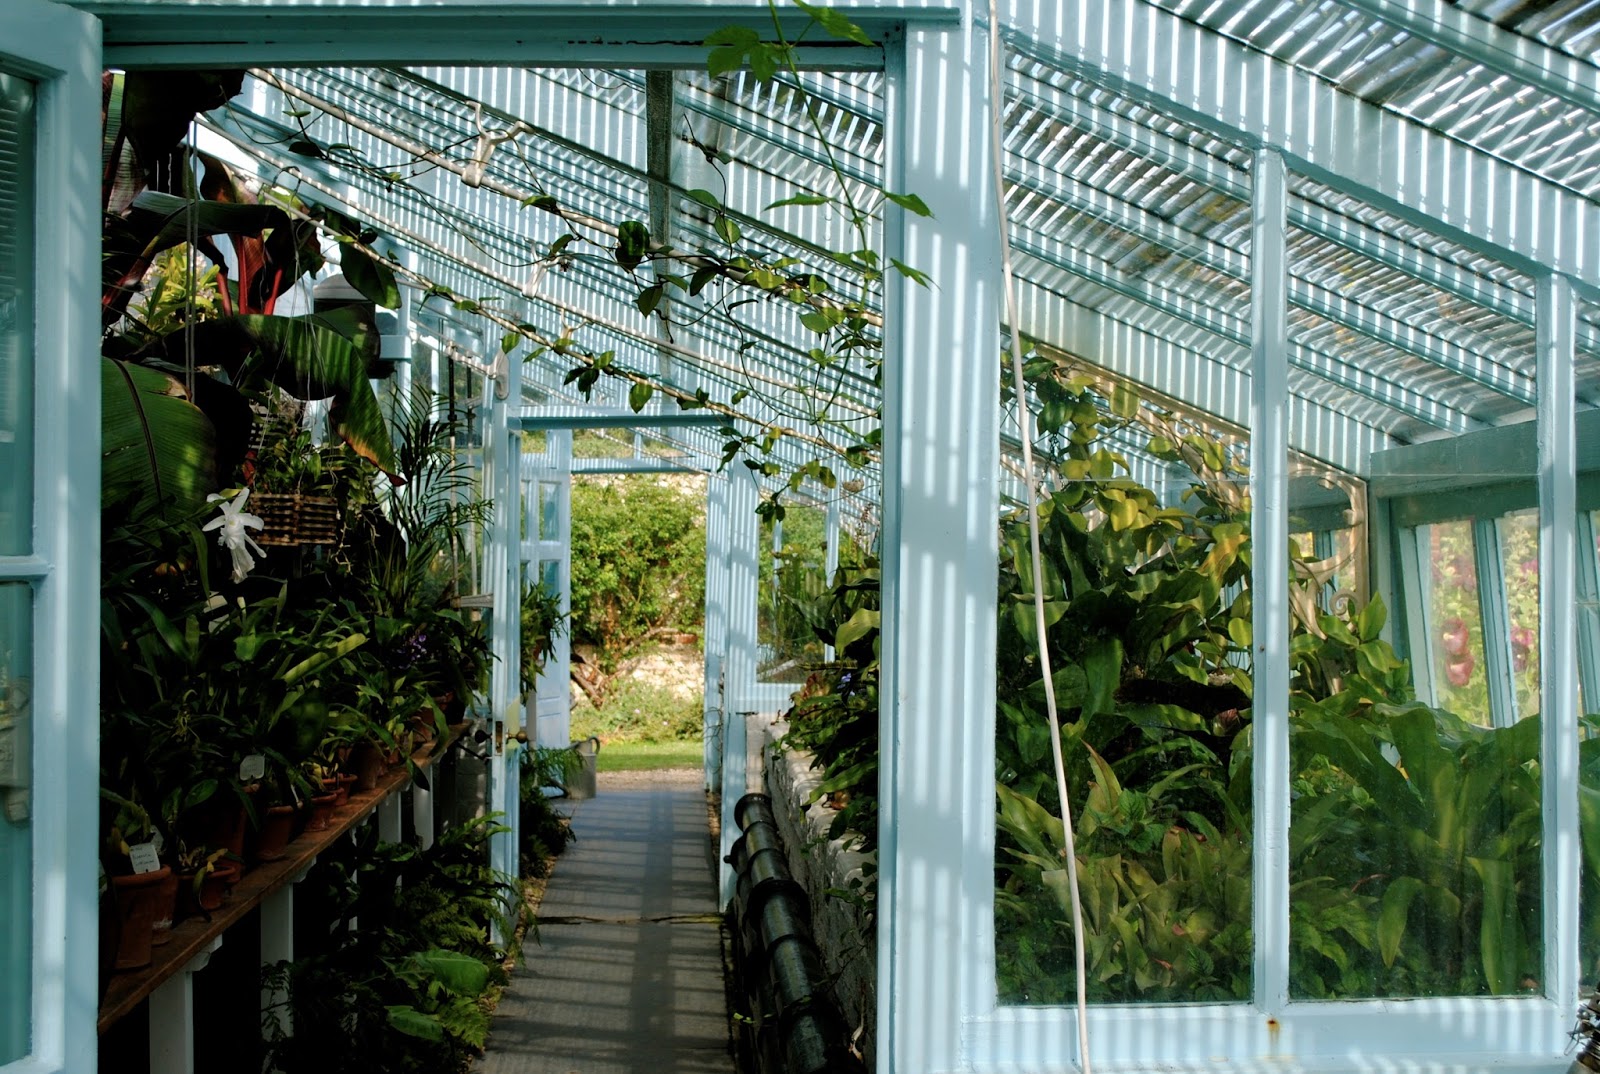 The Greenhouse of Charles Darwin at the Downe House in Kent England